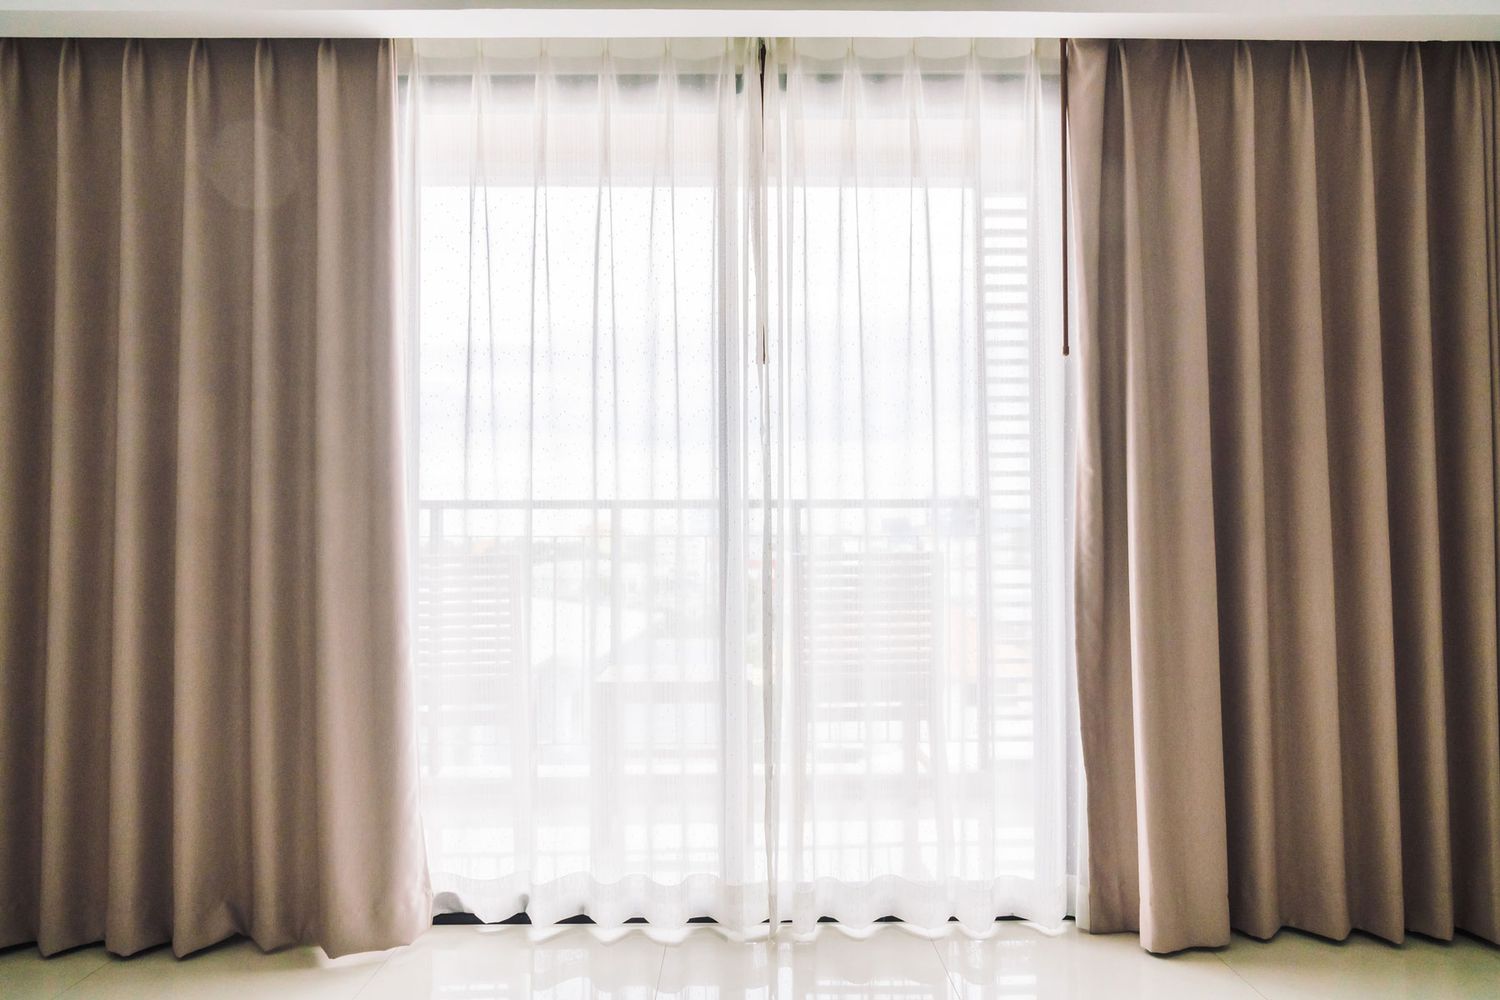 Guide To Curtains And Window Treatments Real Simple,Goodwill Furniture Donation Drop Off